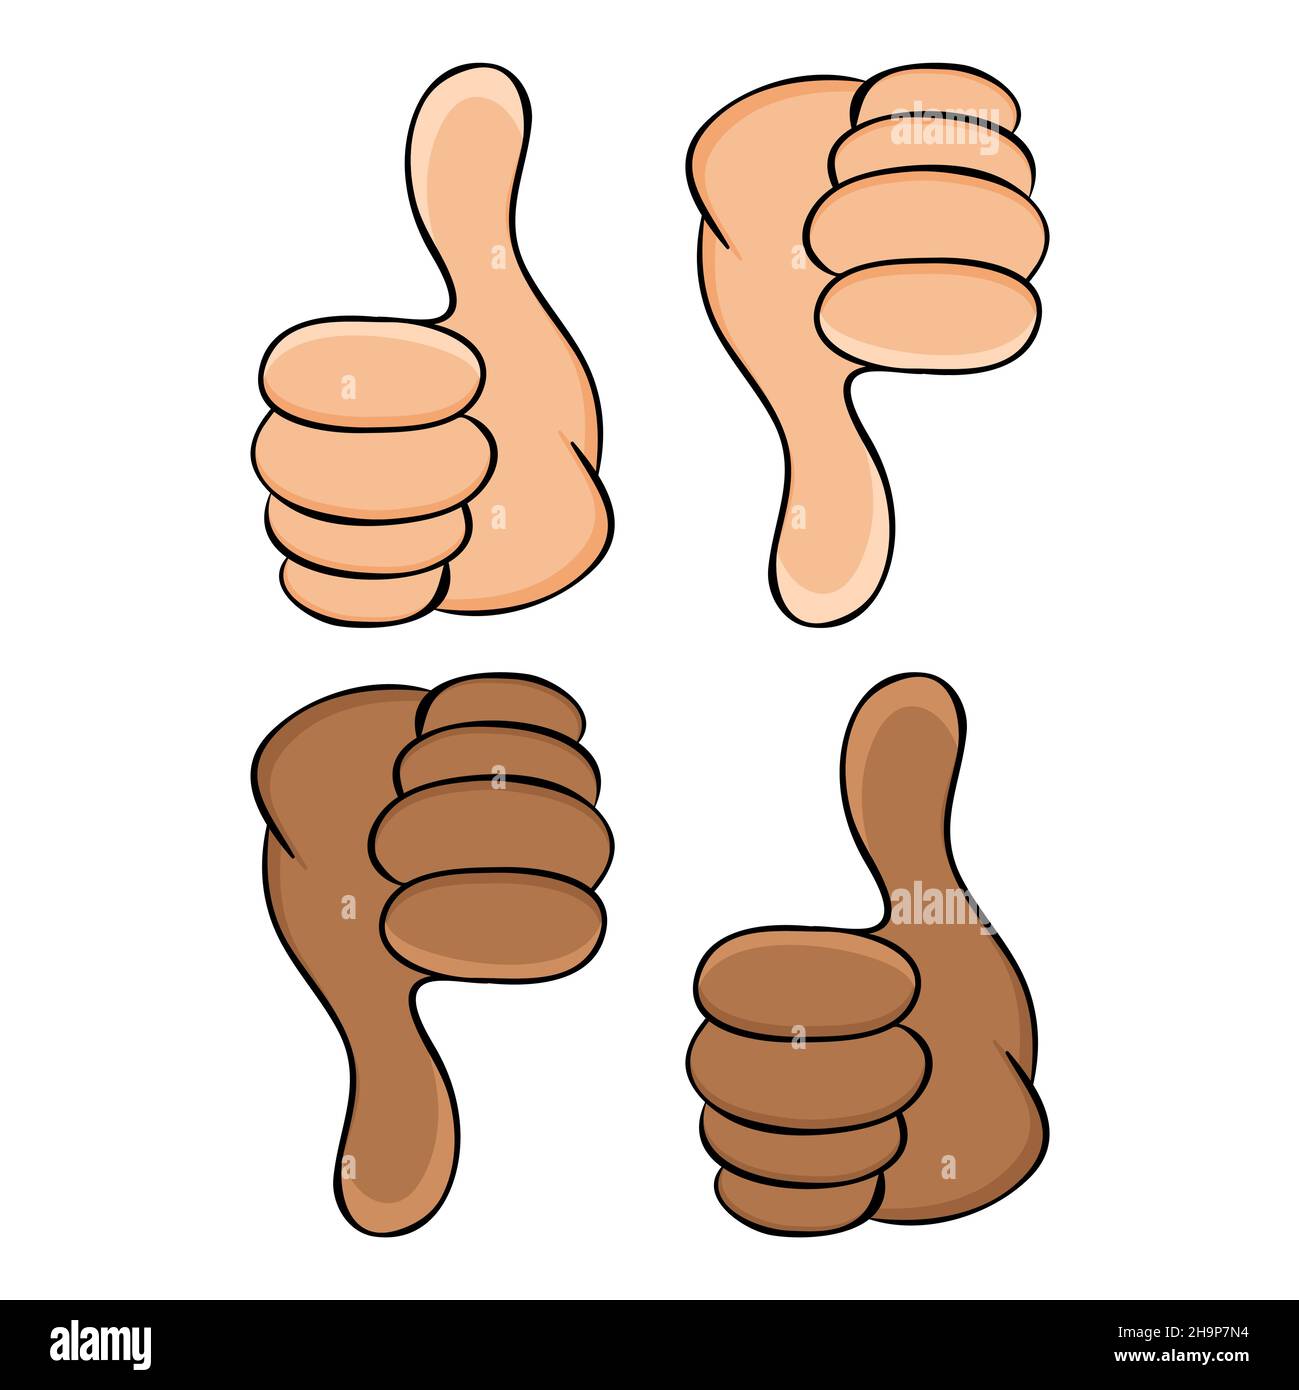 Thumb up and thumb down. Dark and light skin hand gesture. Stock Vector